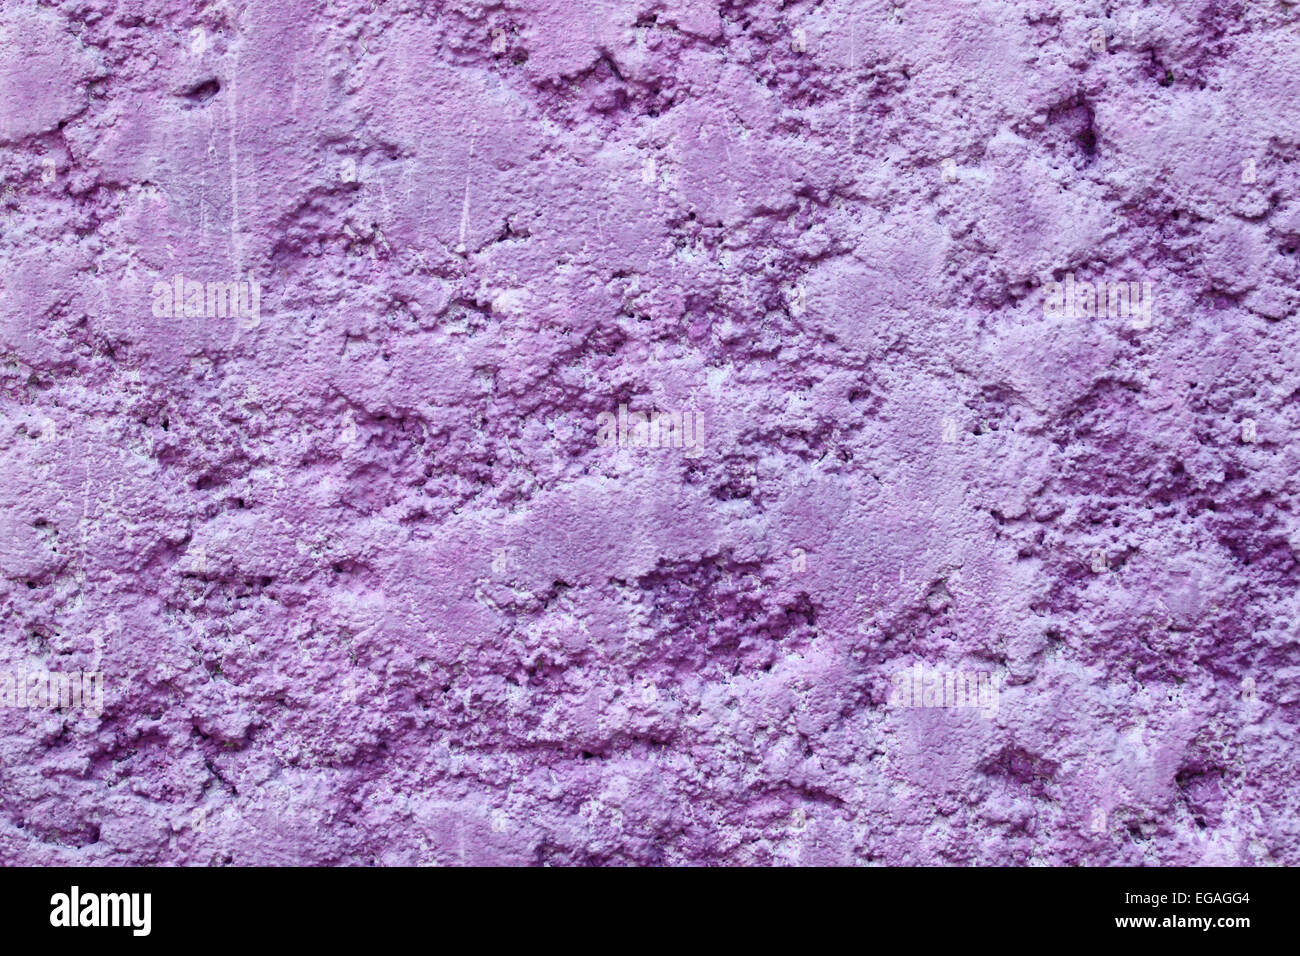 Surface of purple roughness for the art background. Stock Photo